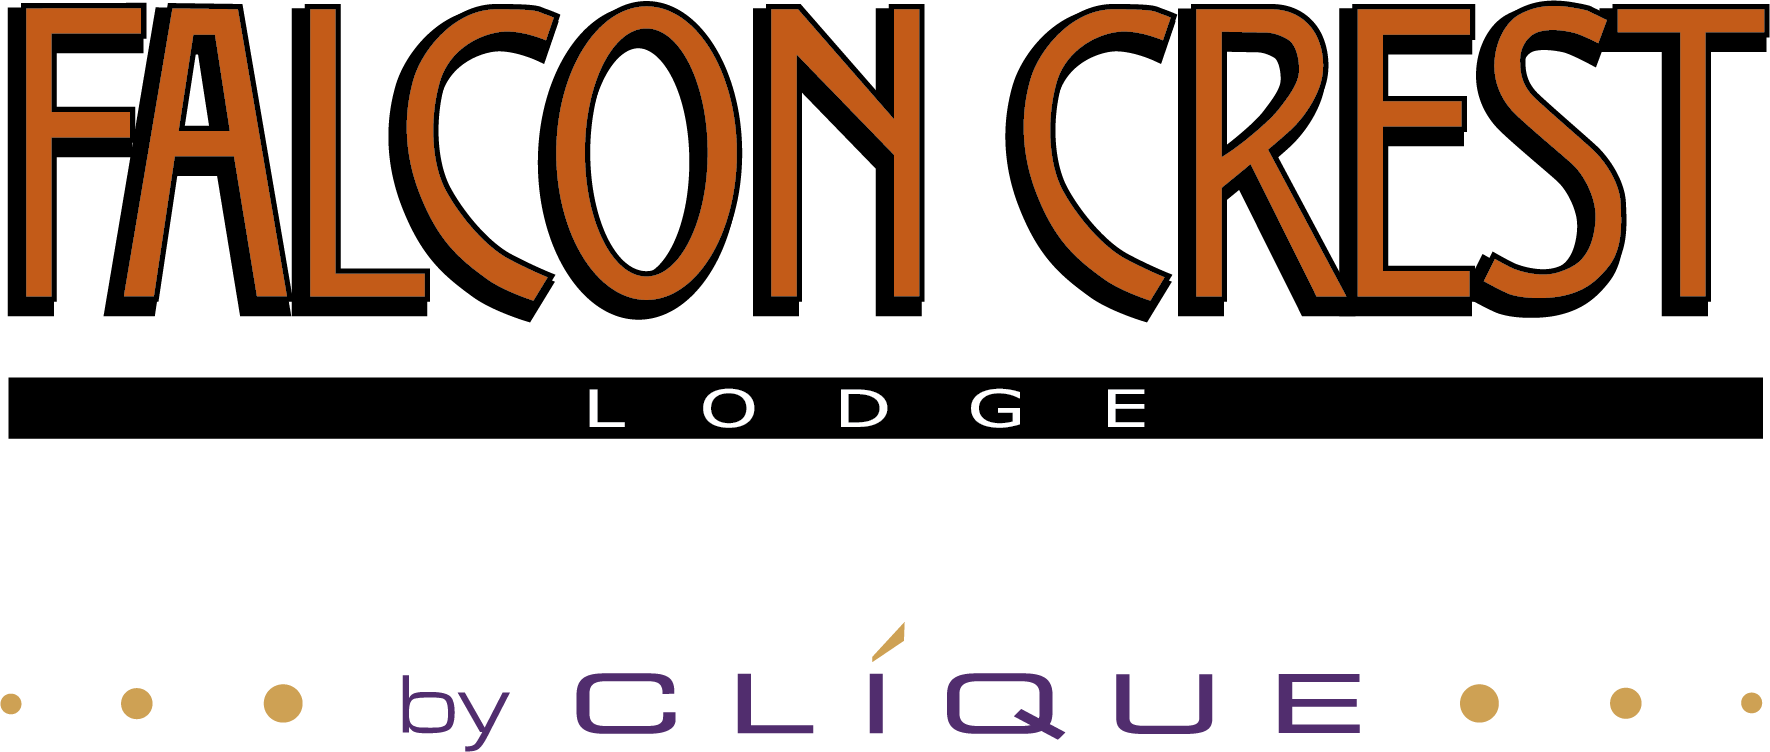 Official logo of Falcon Crest